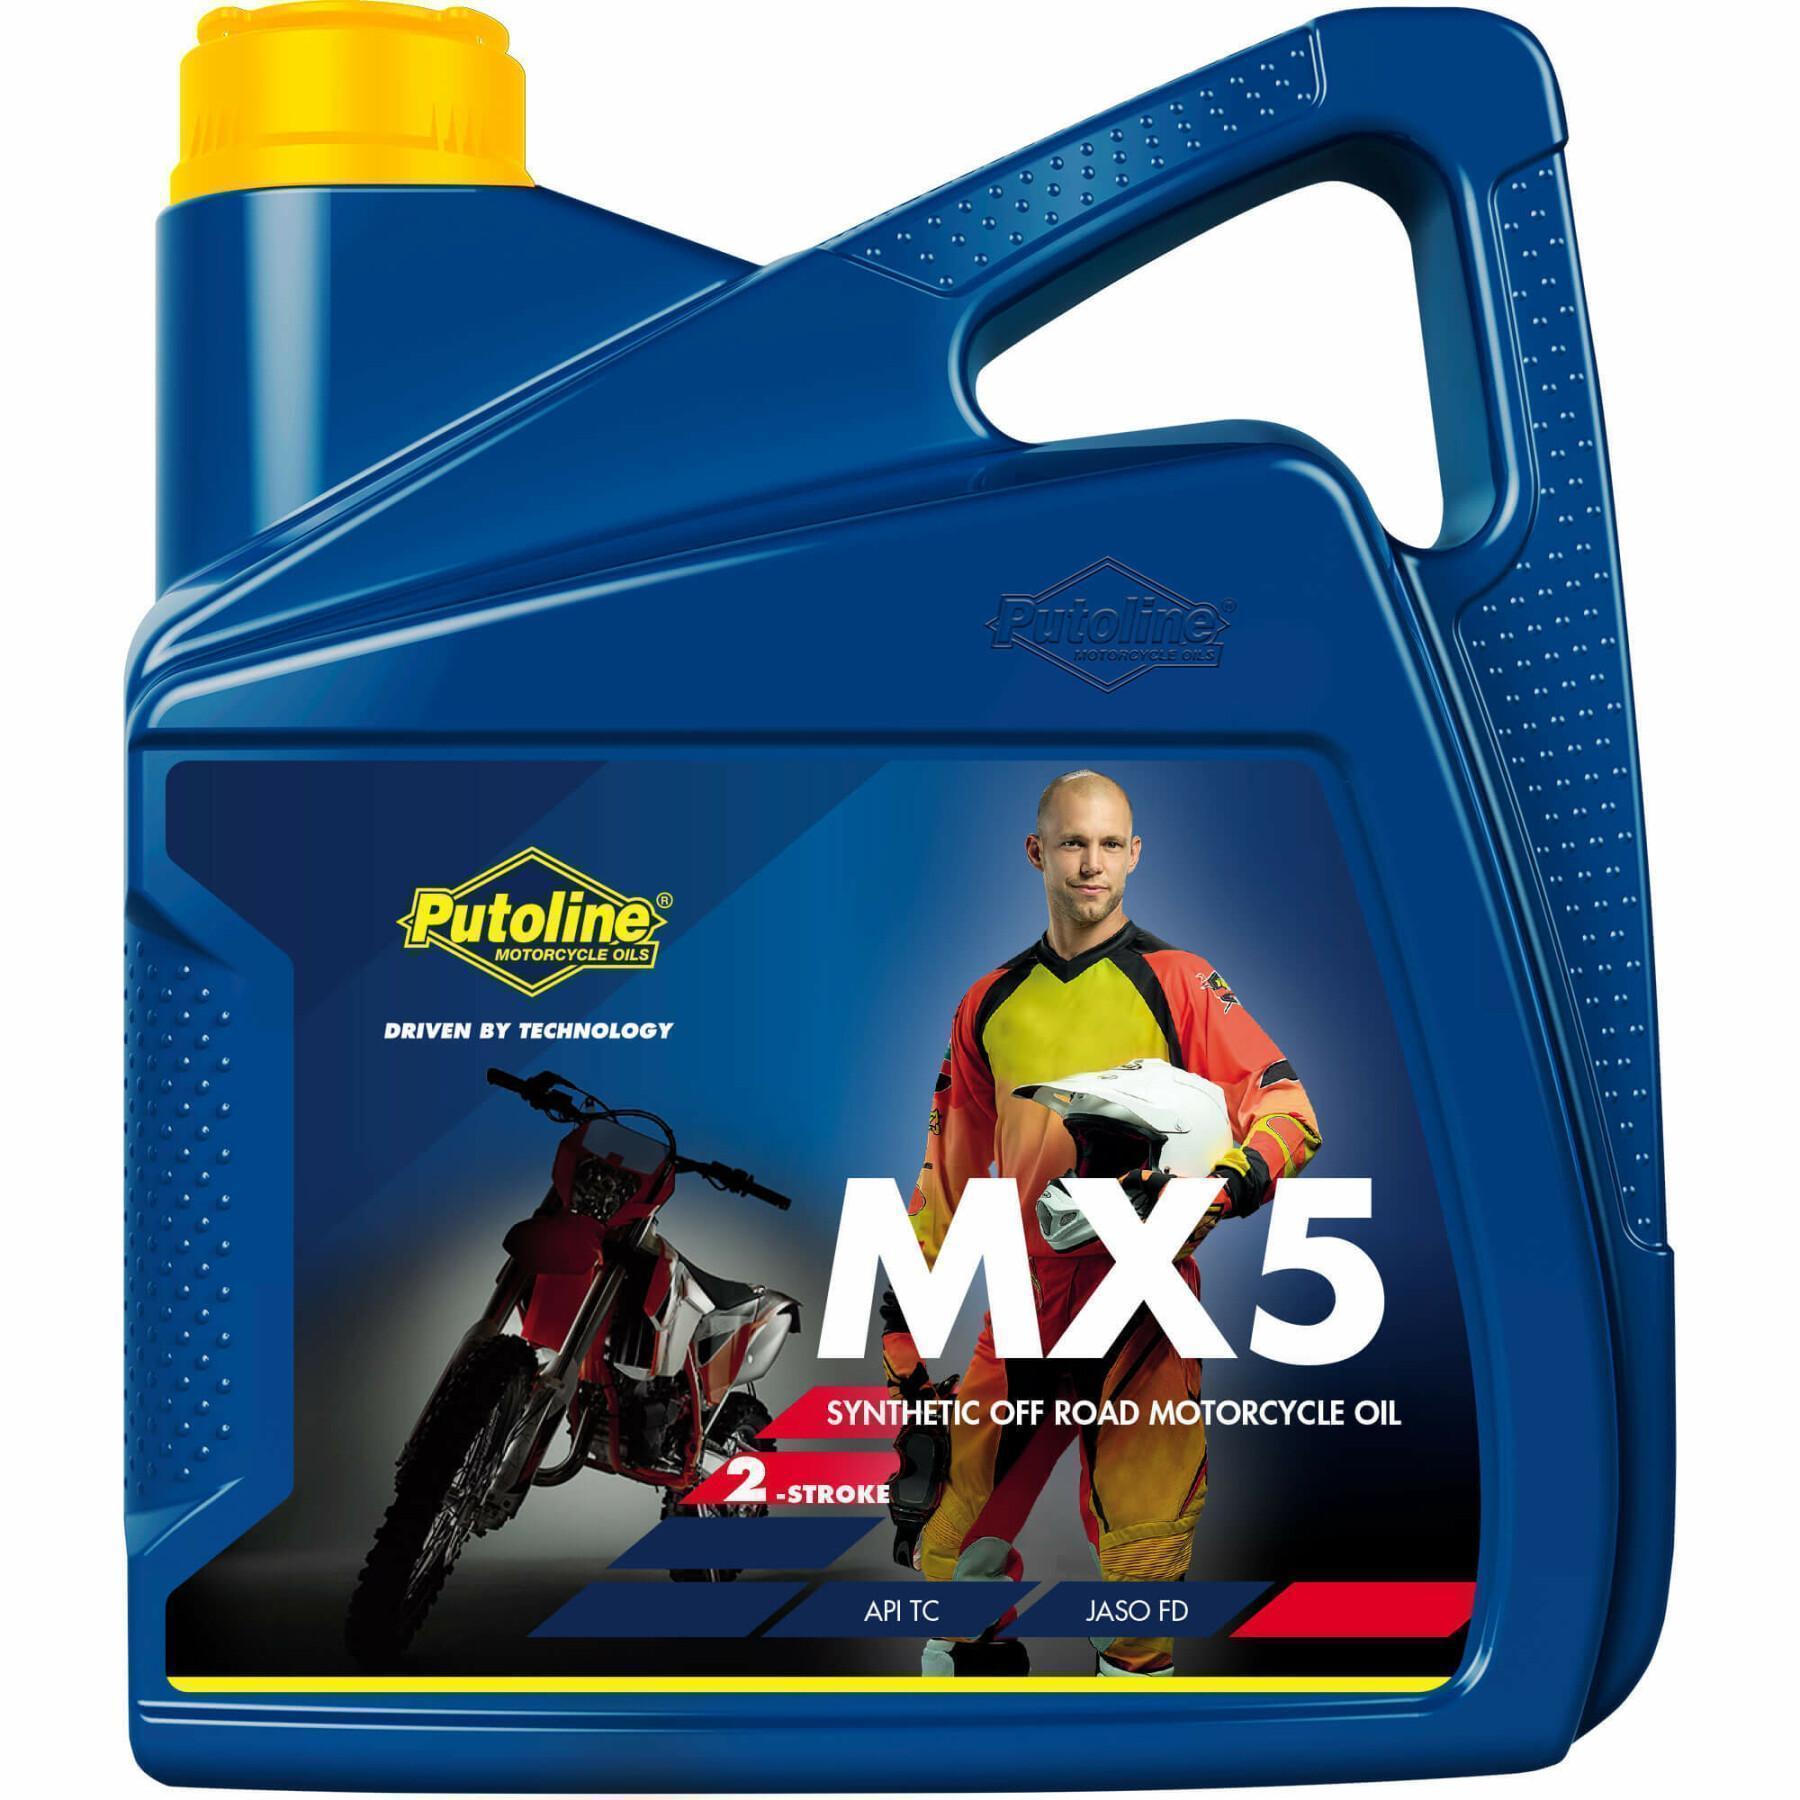 Motorcycle oil in can Putoline MX 5